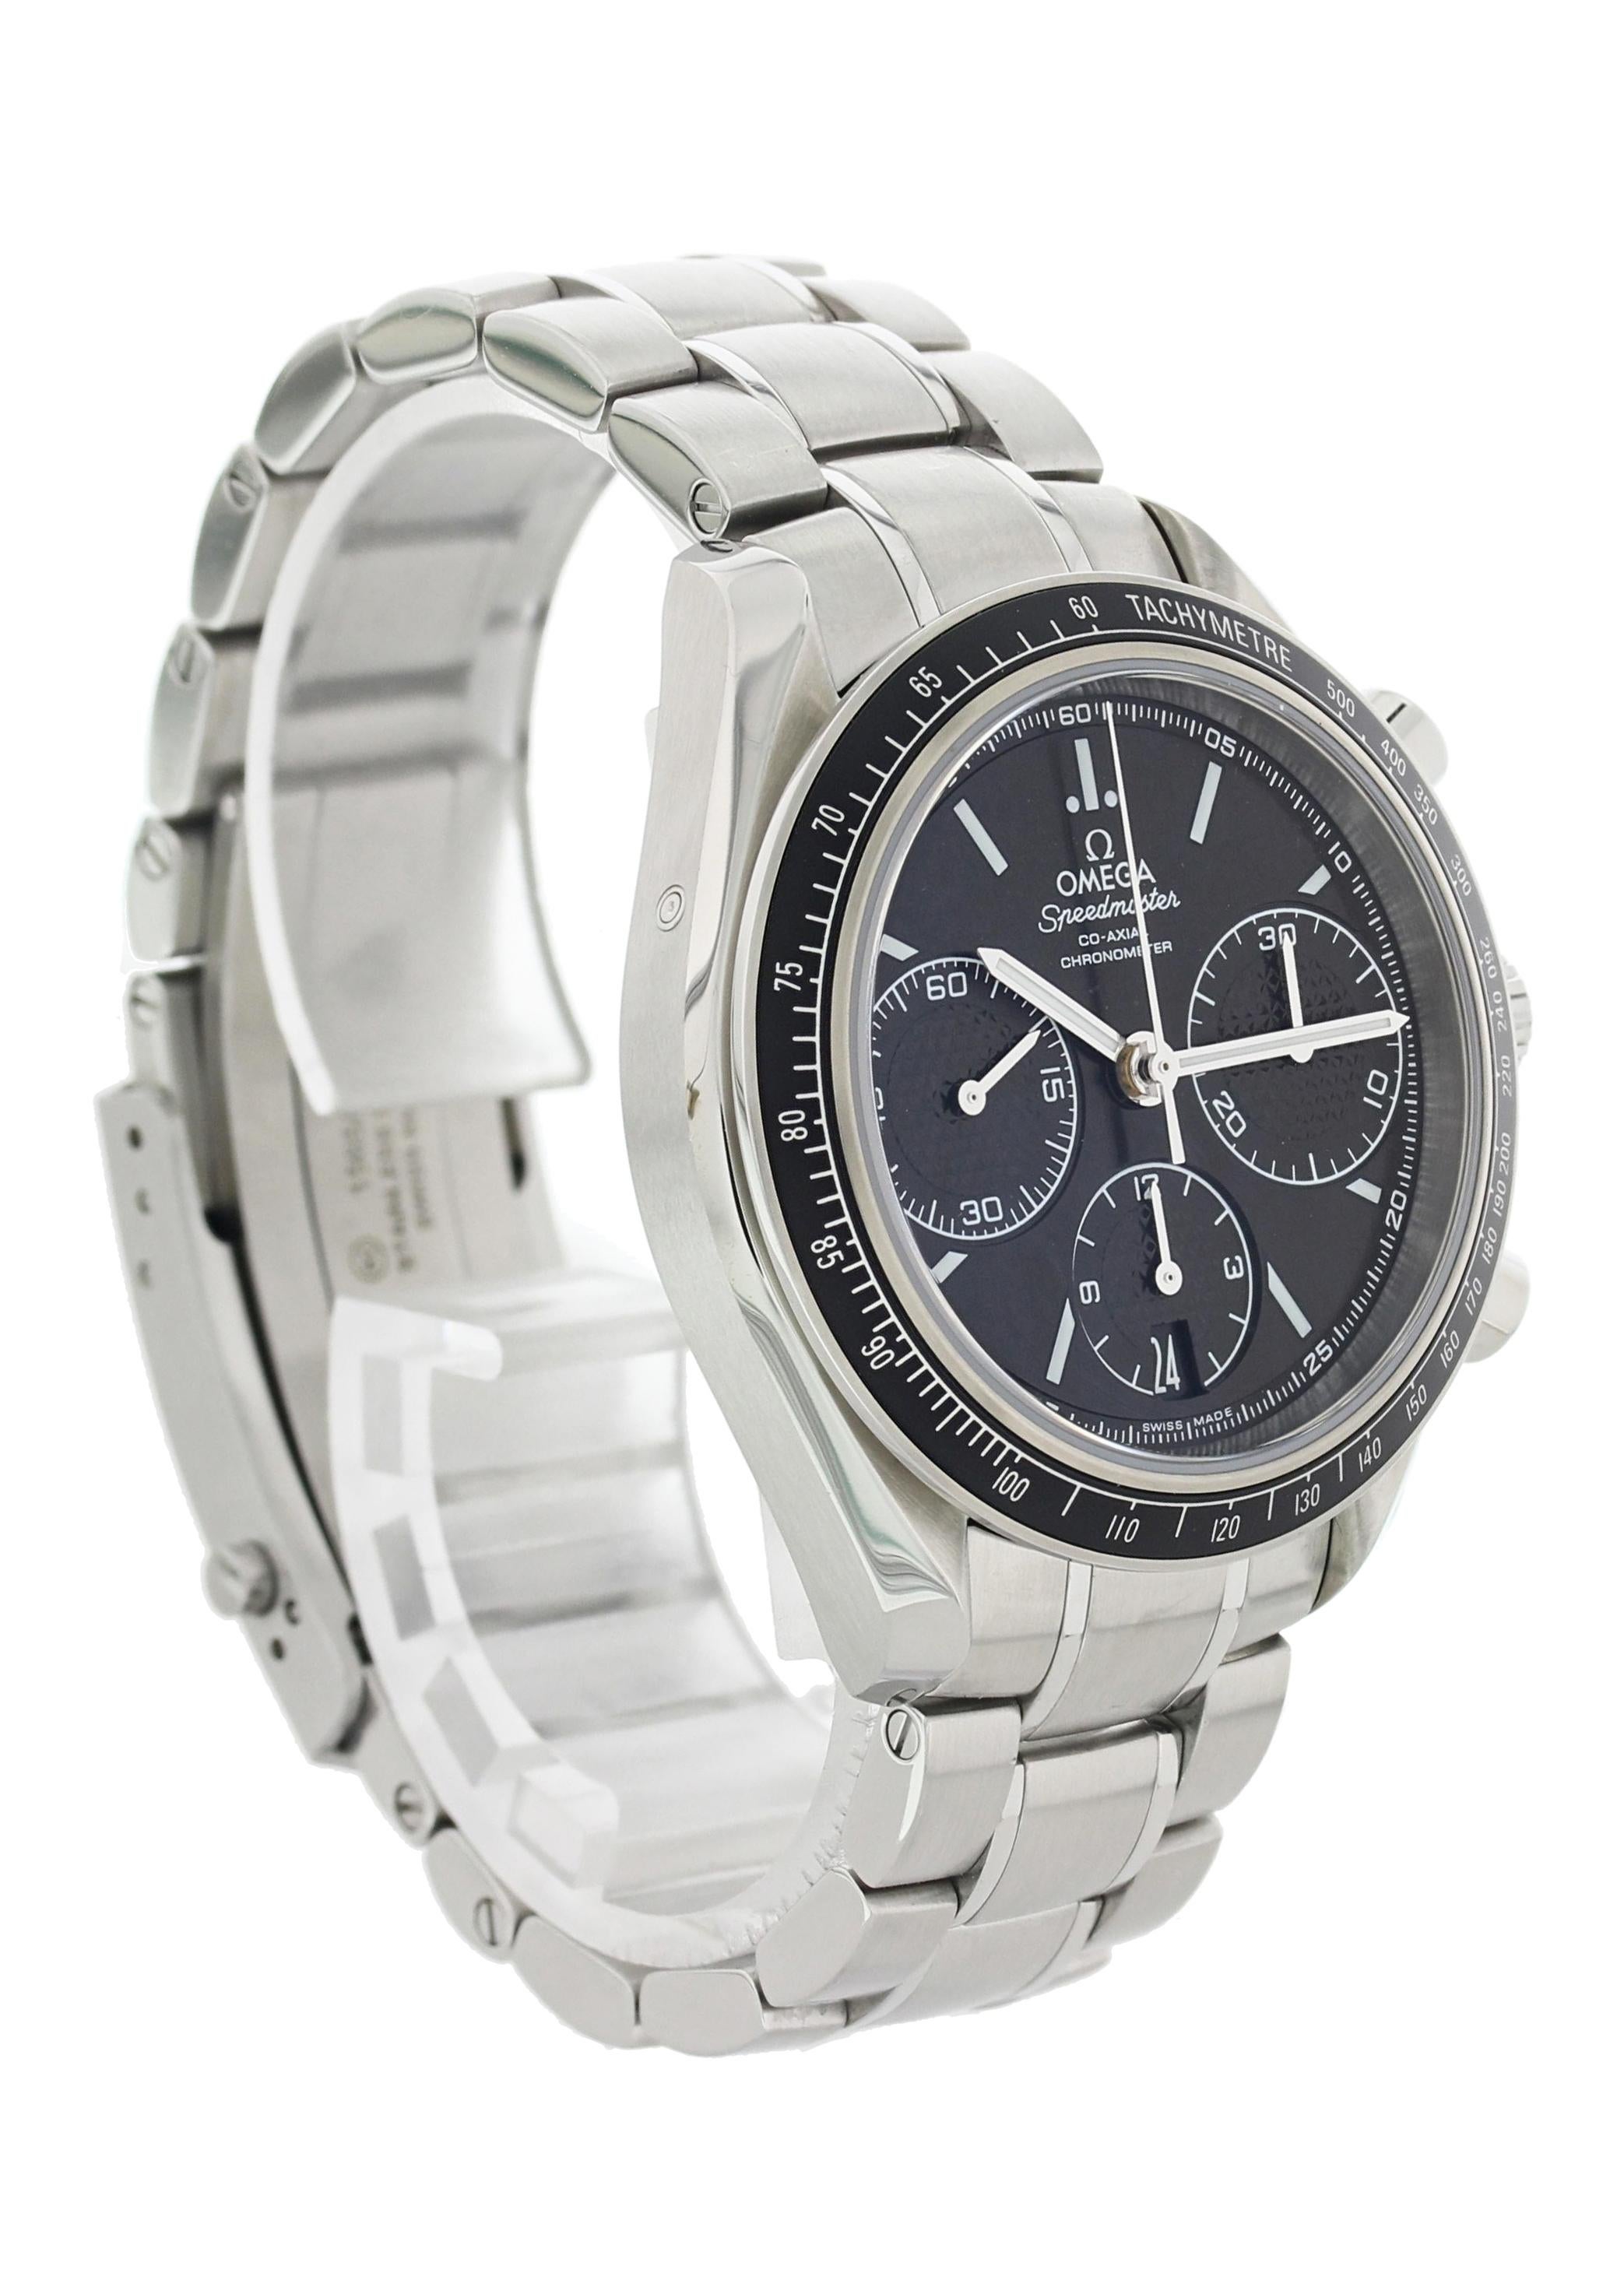 Omega Speedmaster Racing Co-Axial 326.30.40.50.01.001 Men's Watch. 40mm stainless steel case. tachymeter bezel with black bezel insert. Black dial with luminous steel hands and index hour markers. Minute markers around the outer rim. Date display at